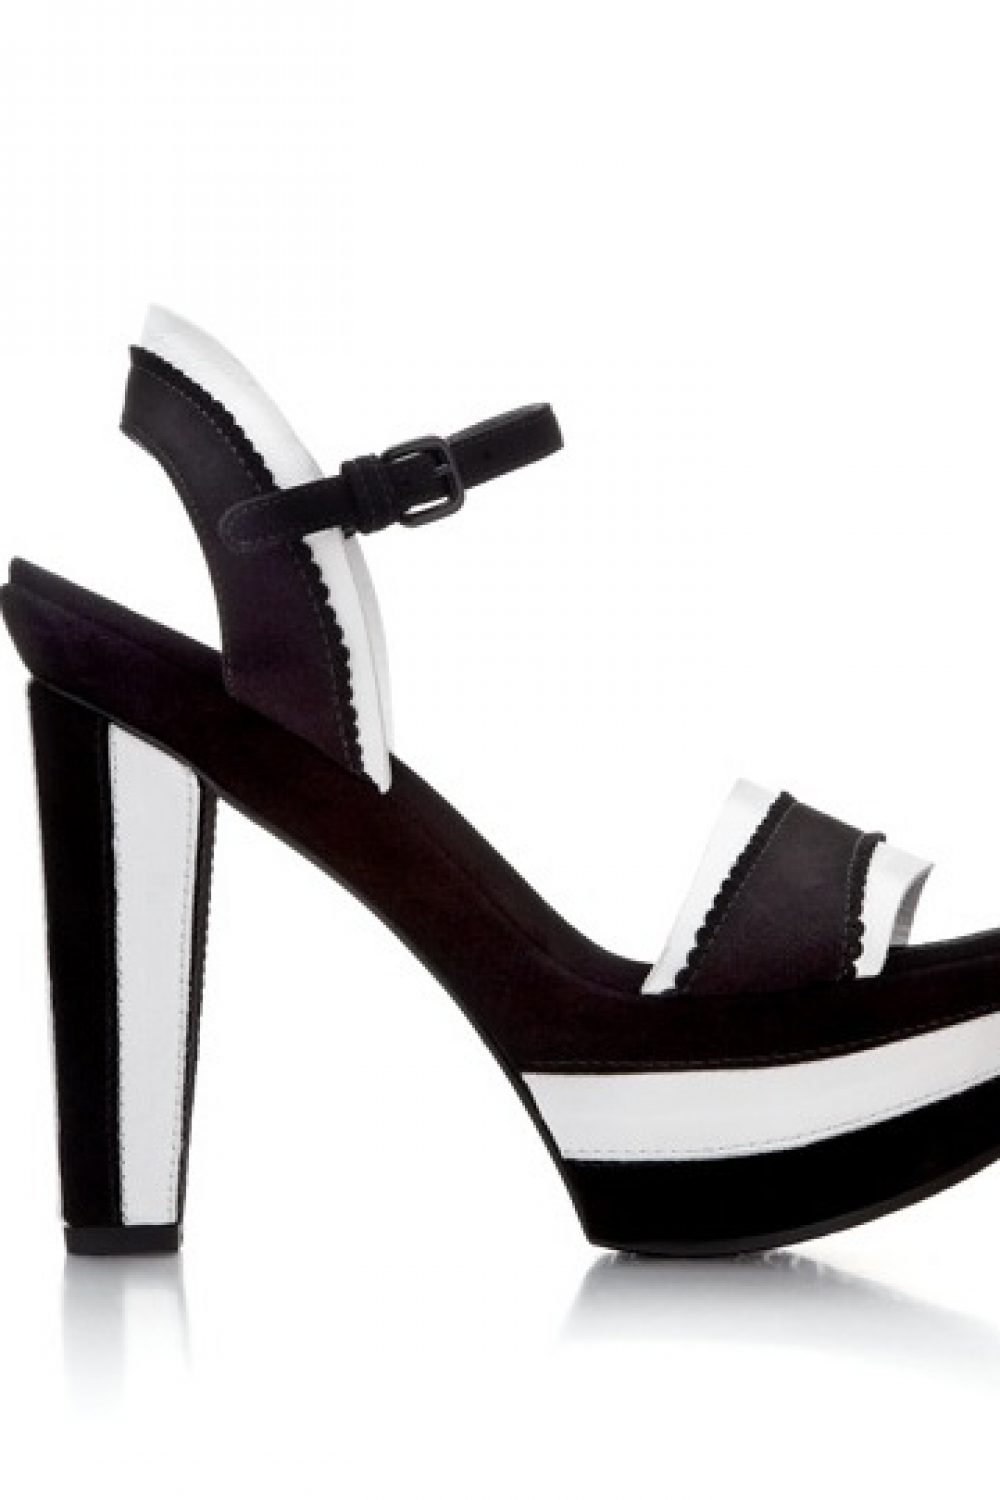 Stuart Weitzman Does Black and White – Just Right